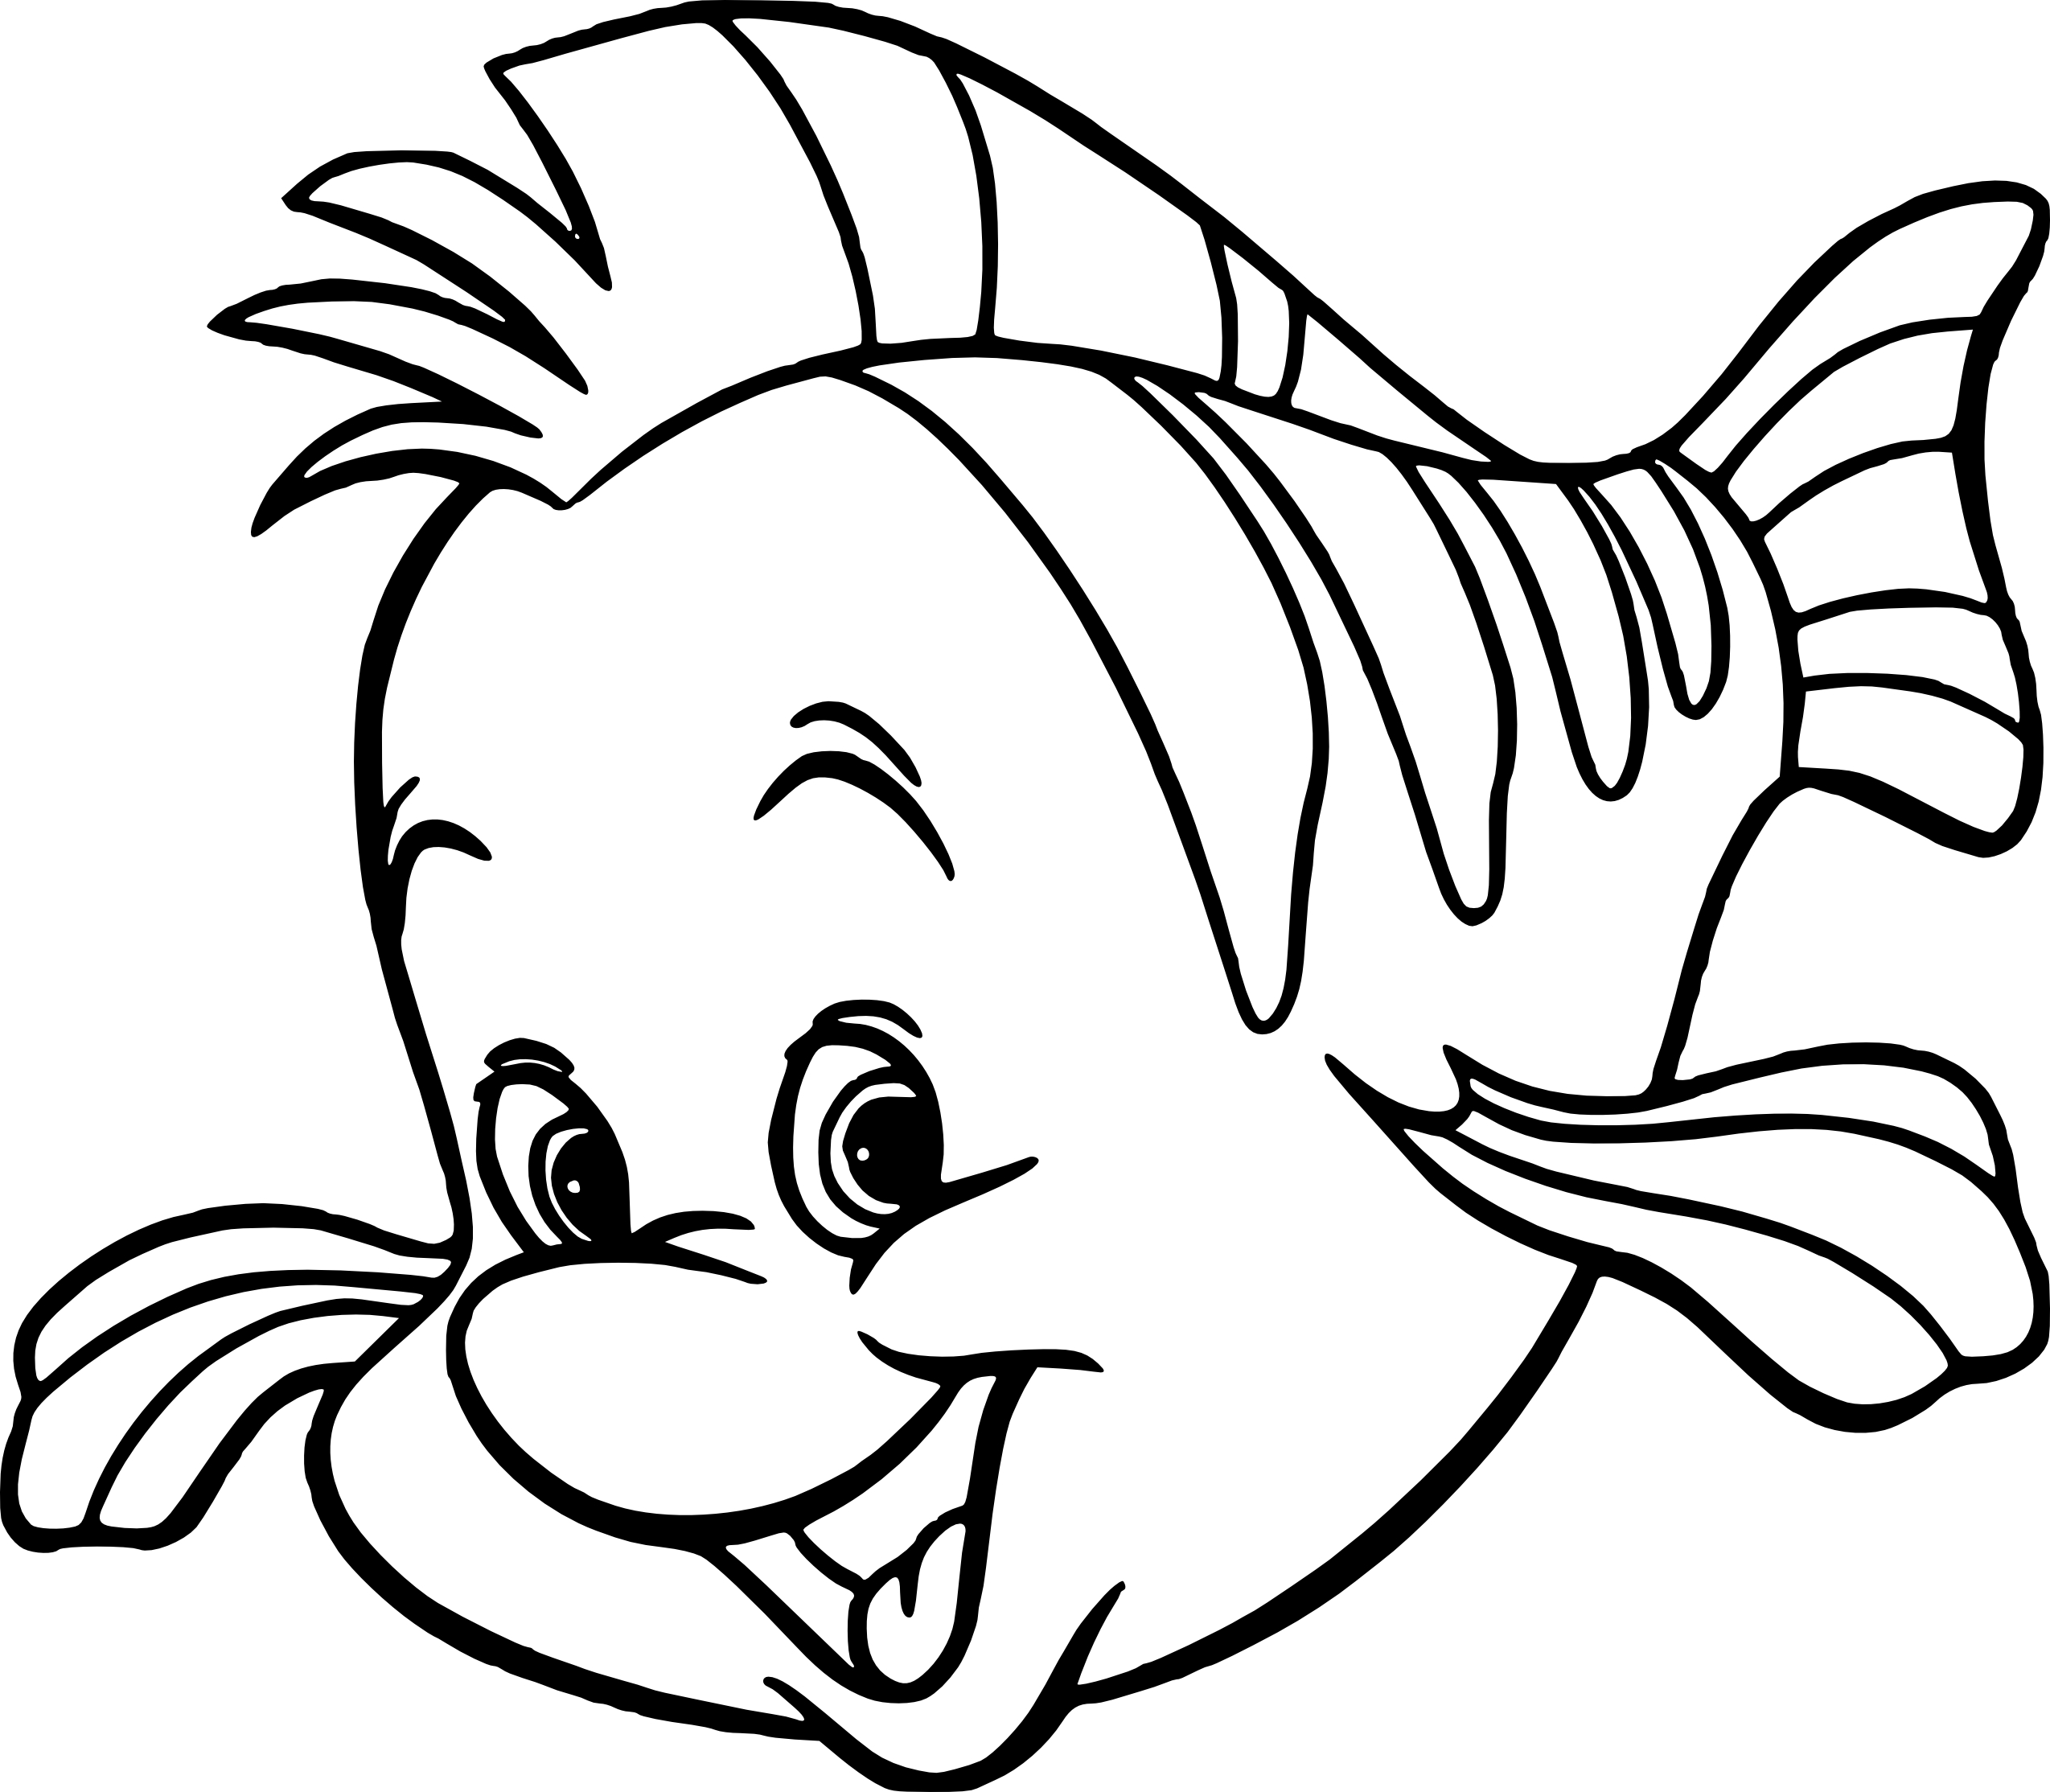 The Polochon Fish coloring page